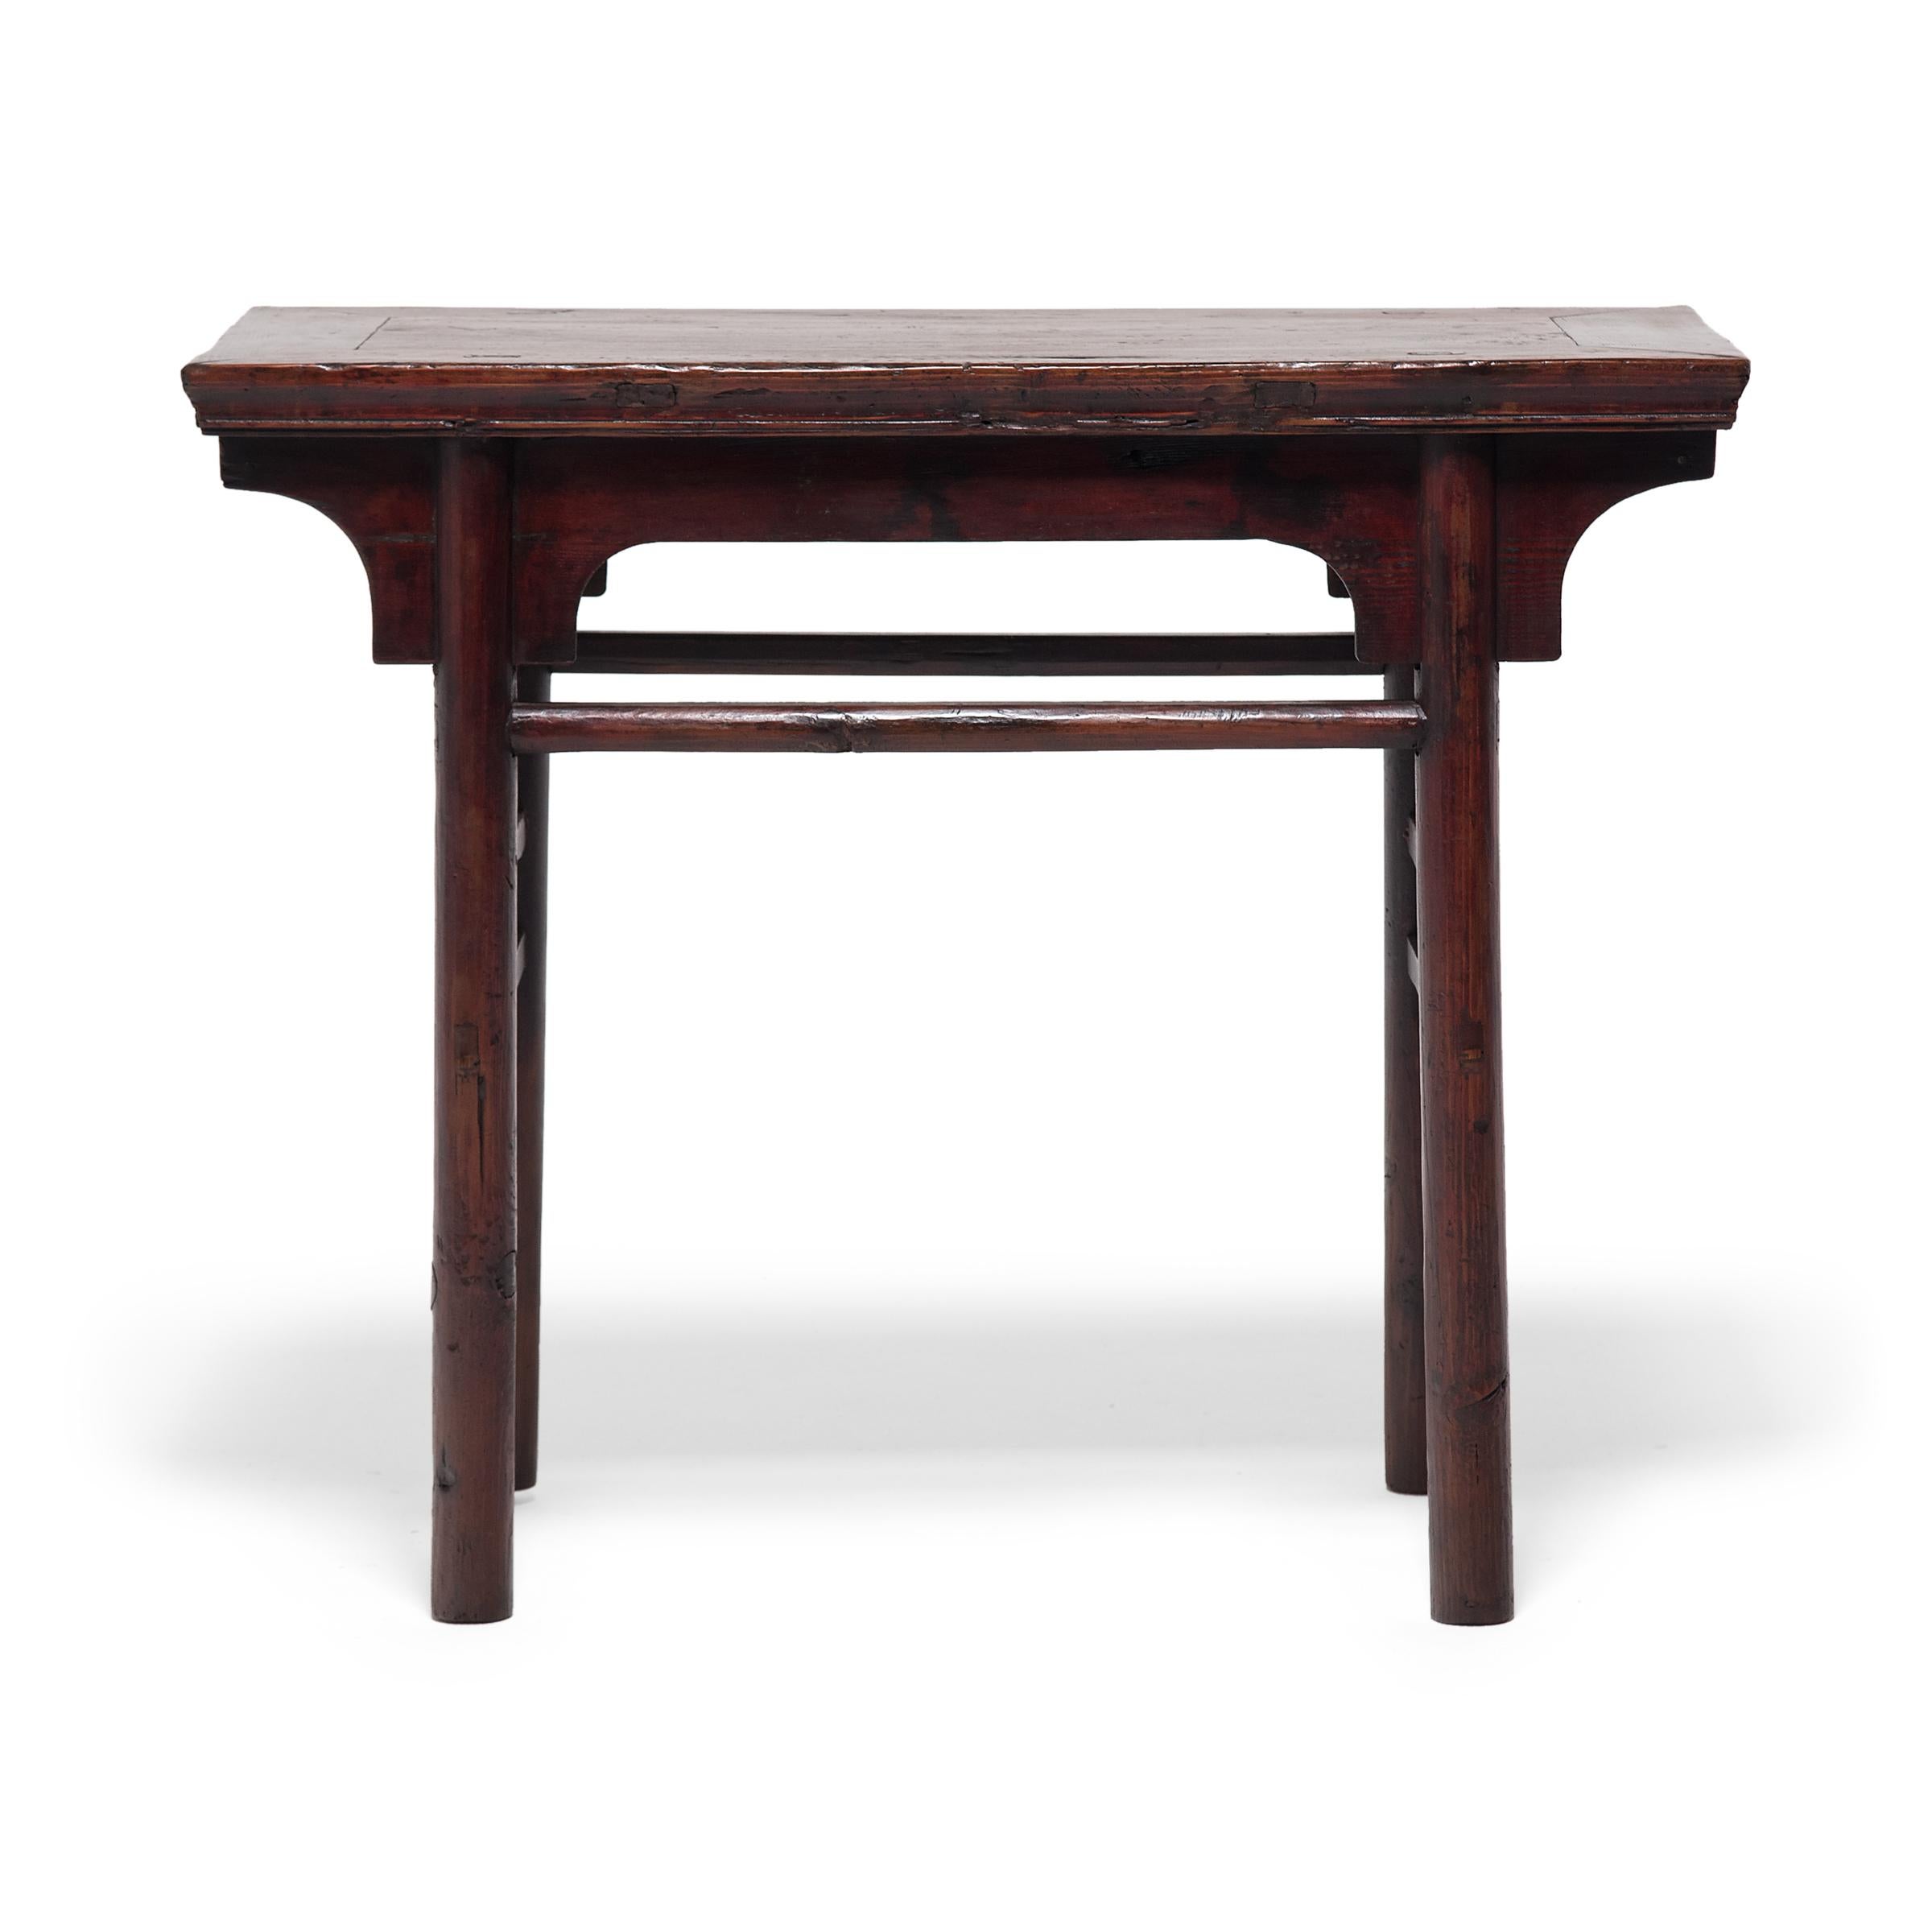 Ideal as a console table in the modern home, this early 20th-century wine table has a classic design, featuring rounded legs, simple curved spandrels, and straight stretcher bars. Placed throughout the Qing-dynasty home, recessed leg side tables